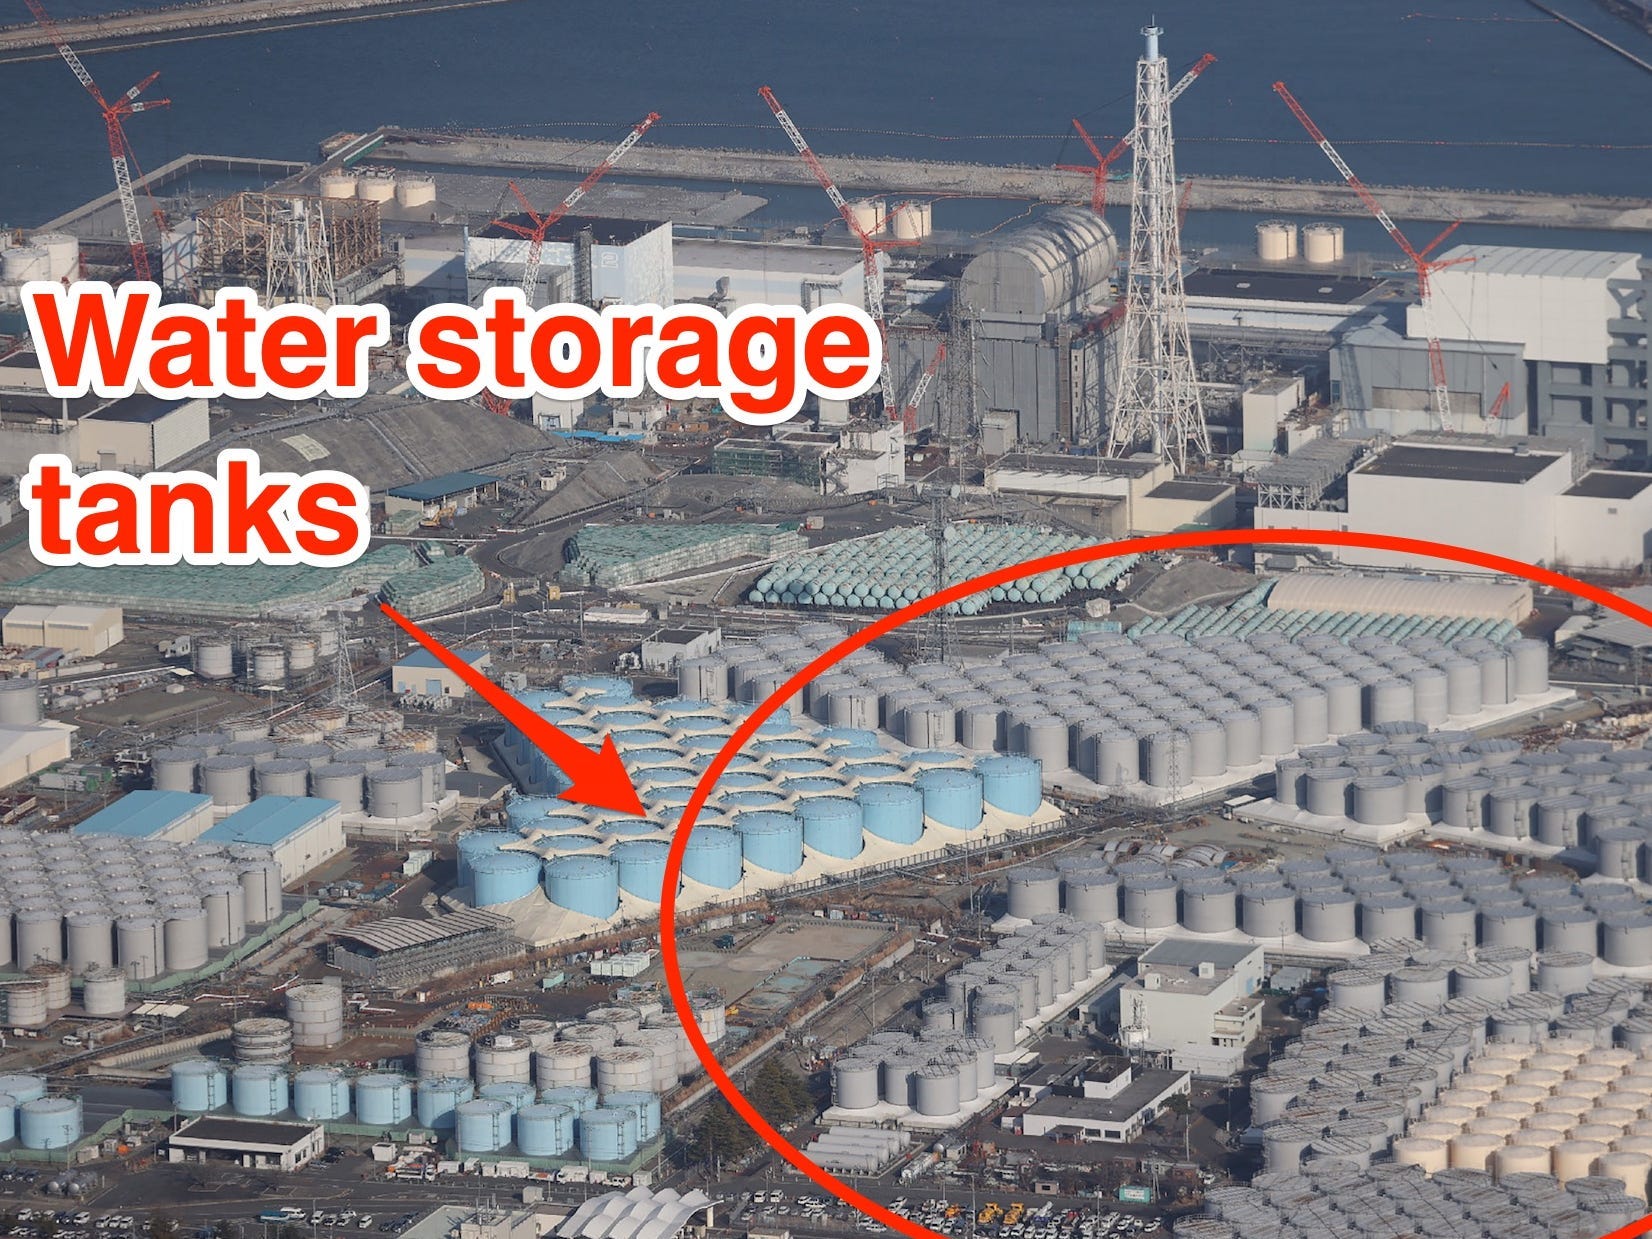 Japan approves plan to dump 1 million tonnes of waste water from